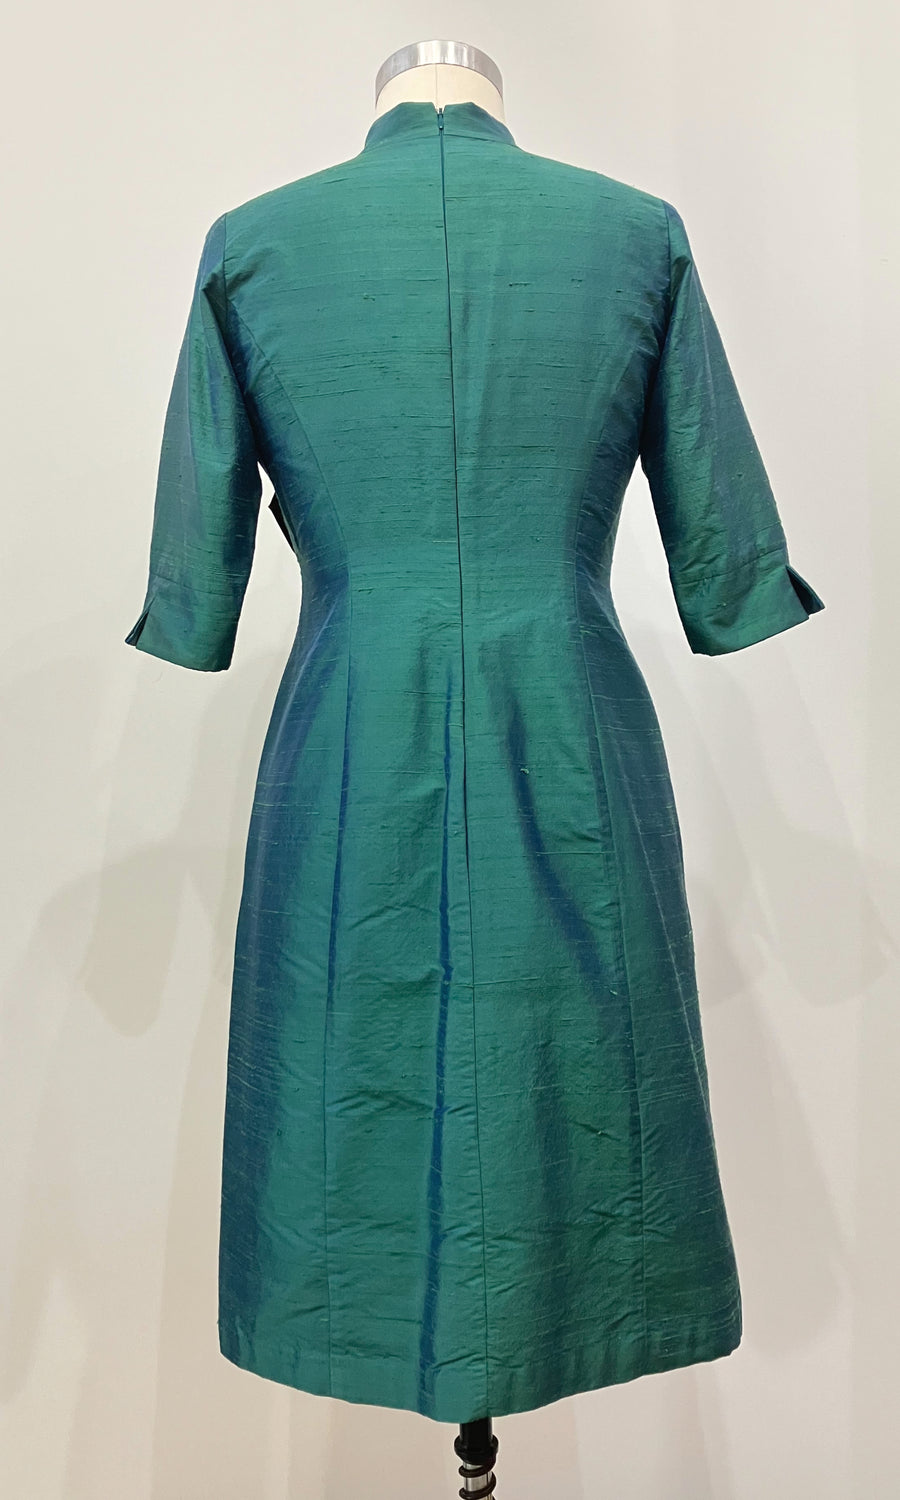 Teal Mandarin-Collar Dress with Sleeves, size Large